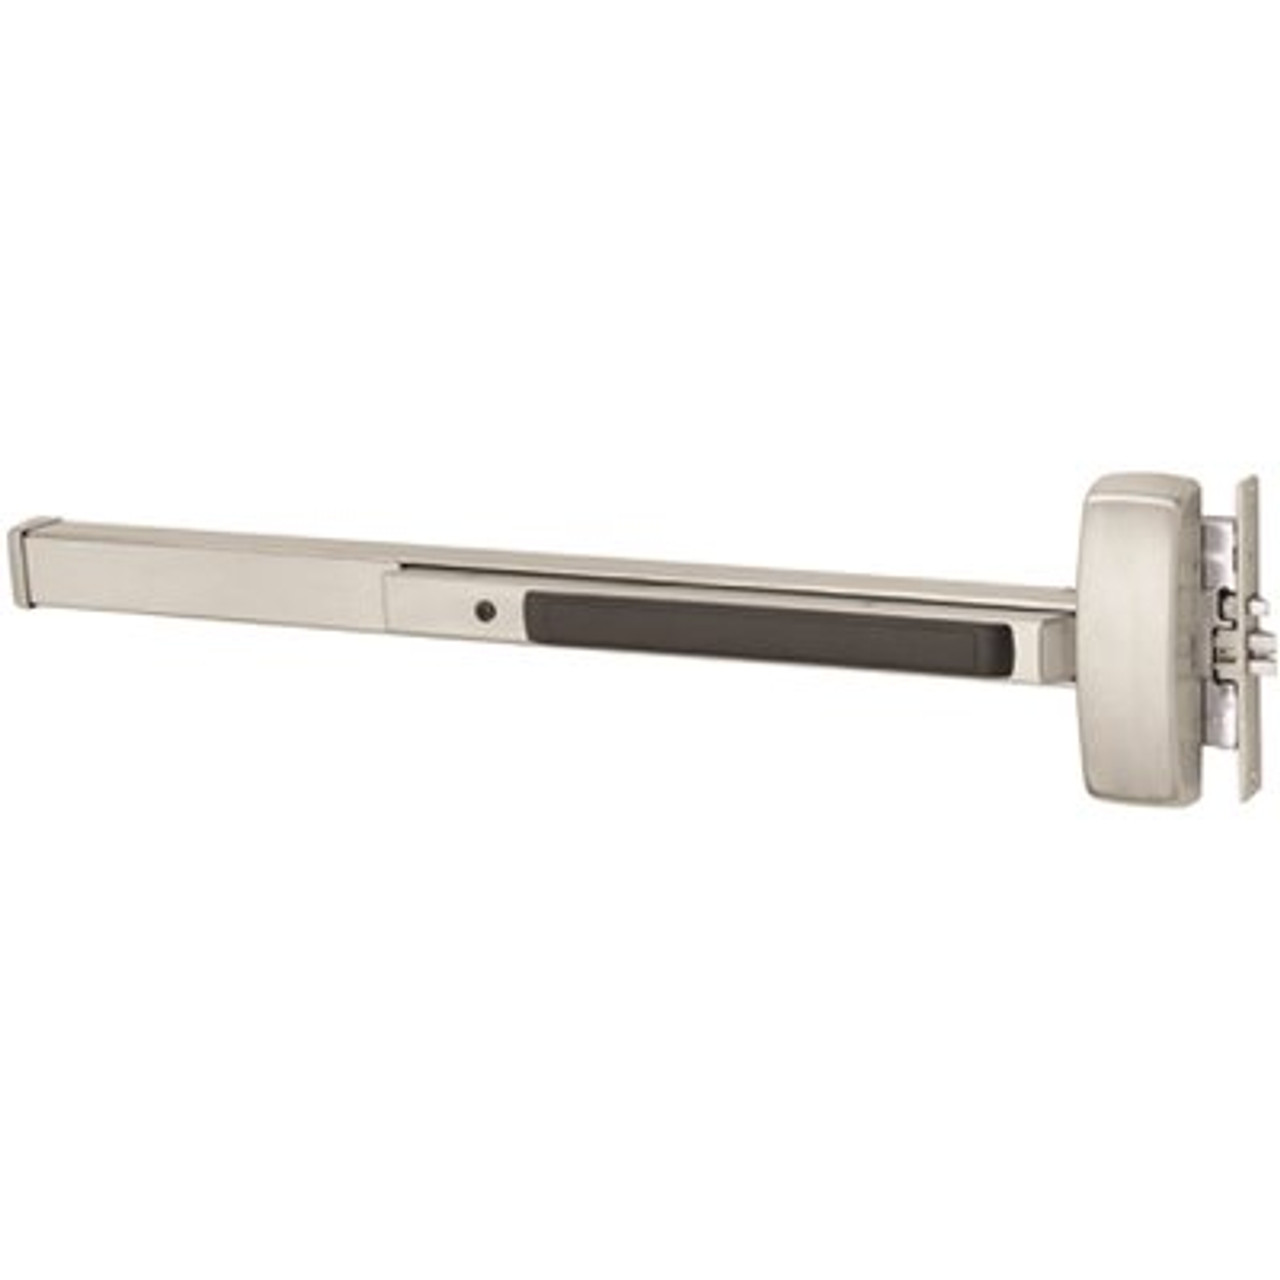 Sargent 80 Series Grade 1,36 In. Stainless Steel Finish Left Hand Reverse Night Latch Mortise Exit Device